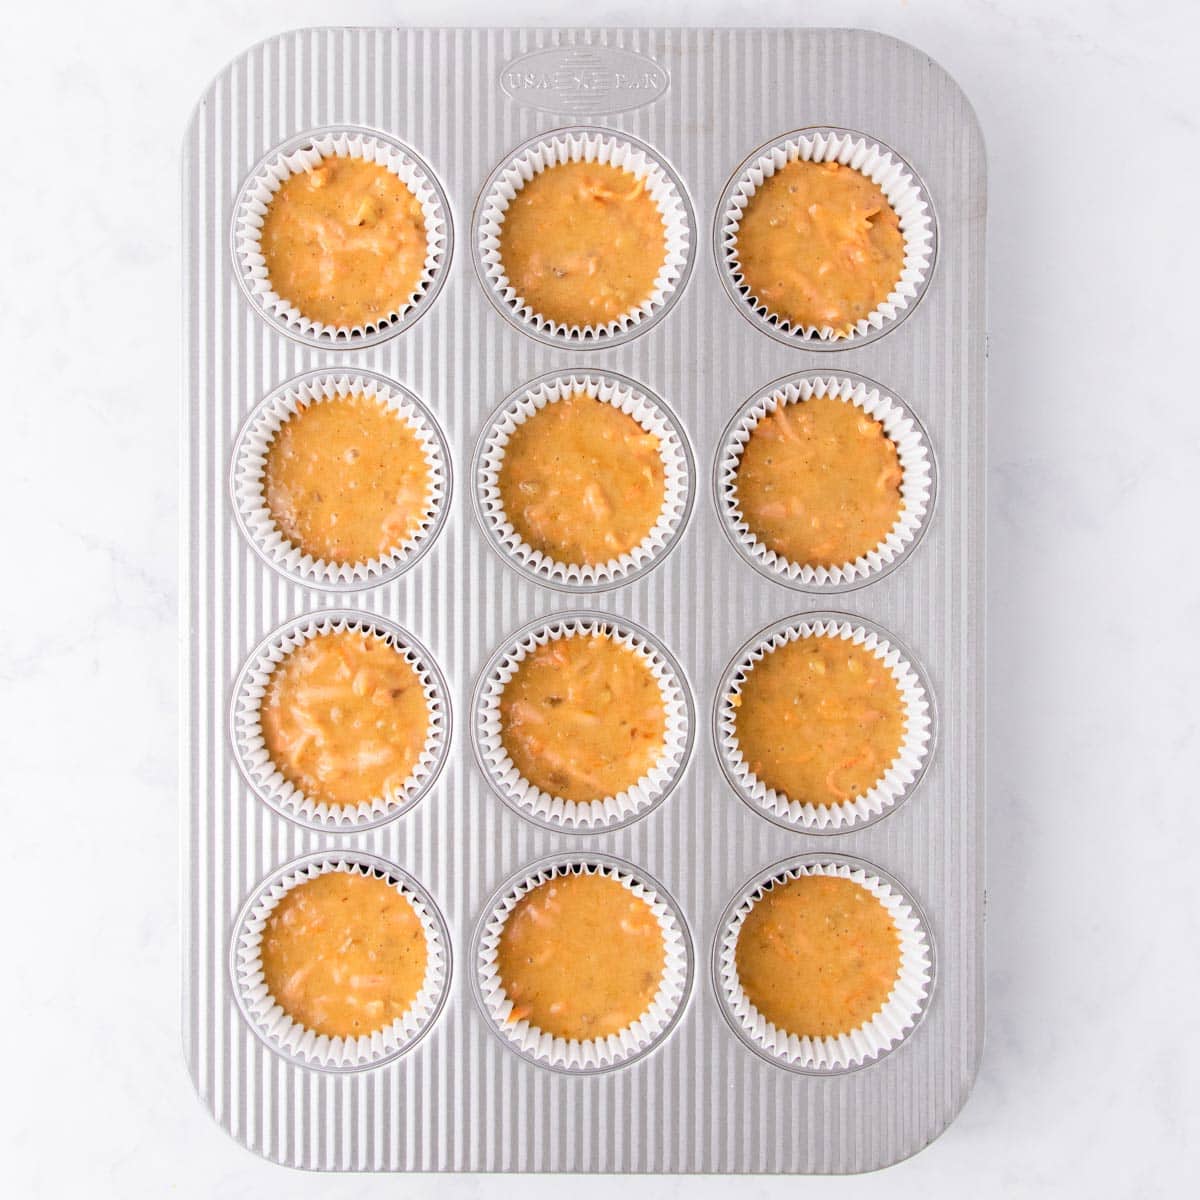 The cupcake batter in a 12-hole muffin pan lined with white cupcake liners.